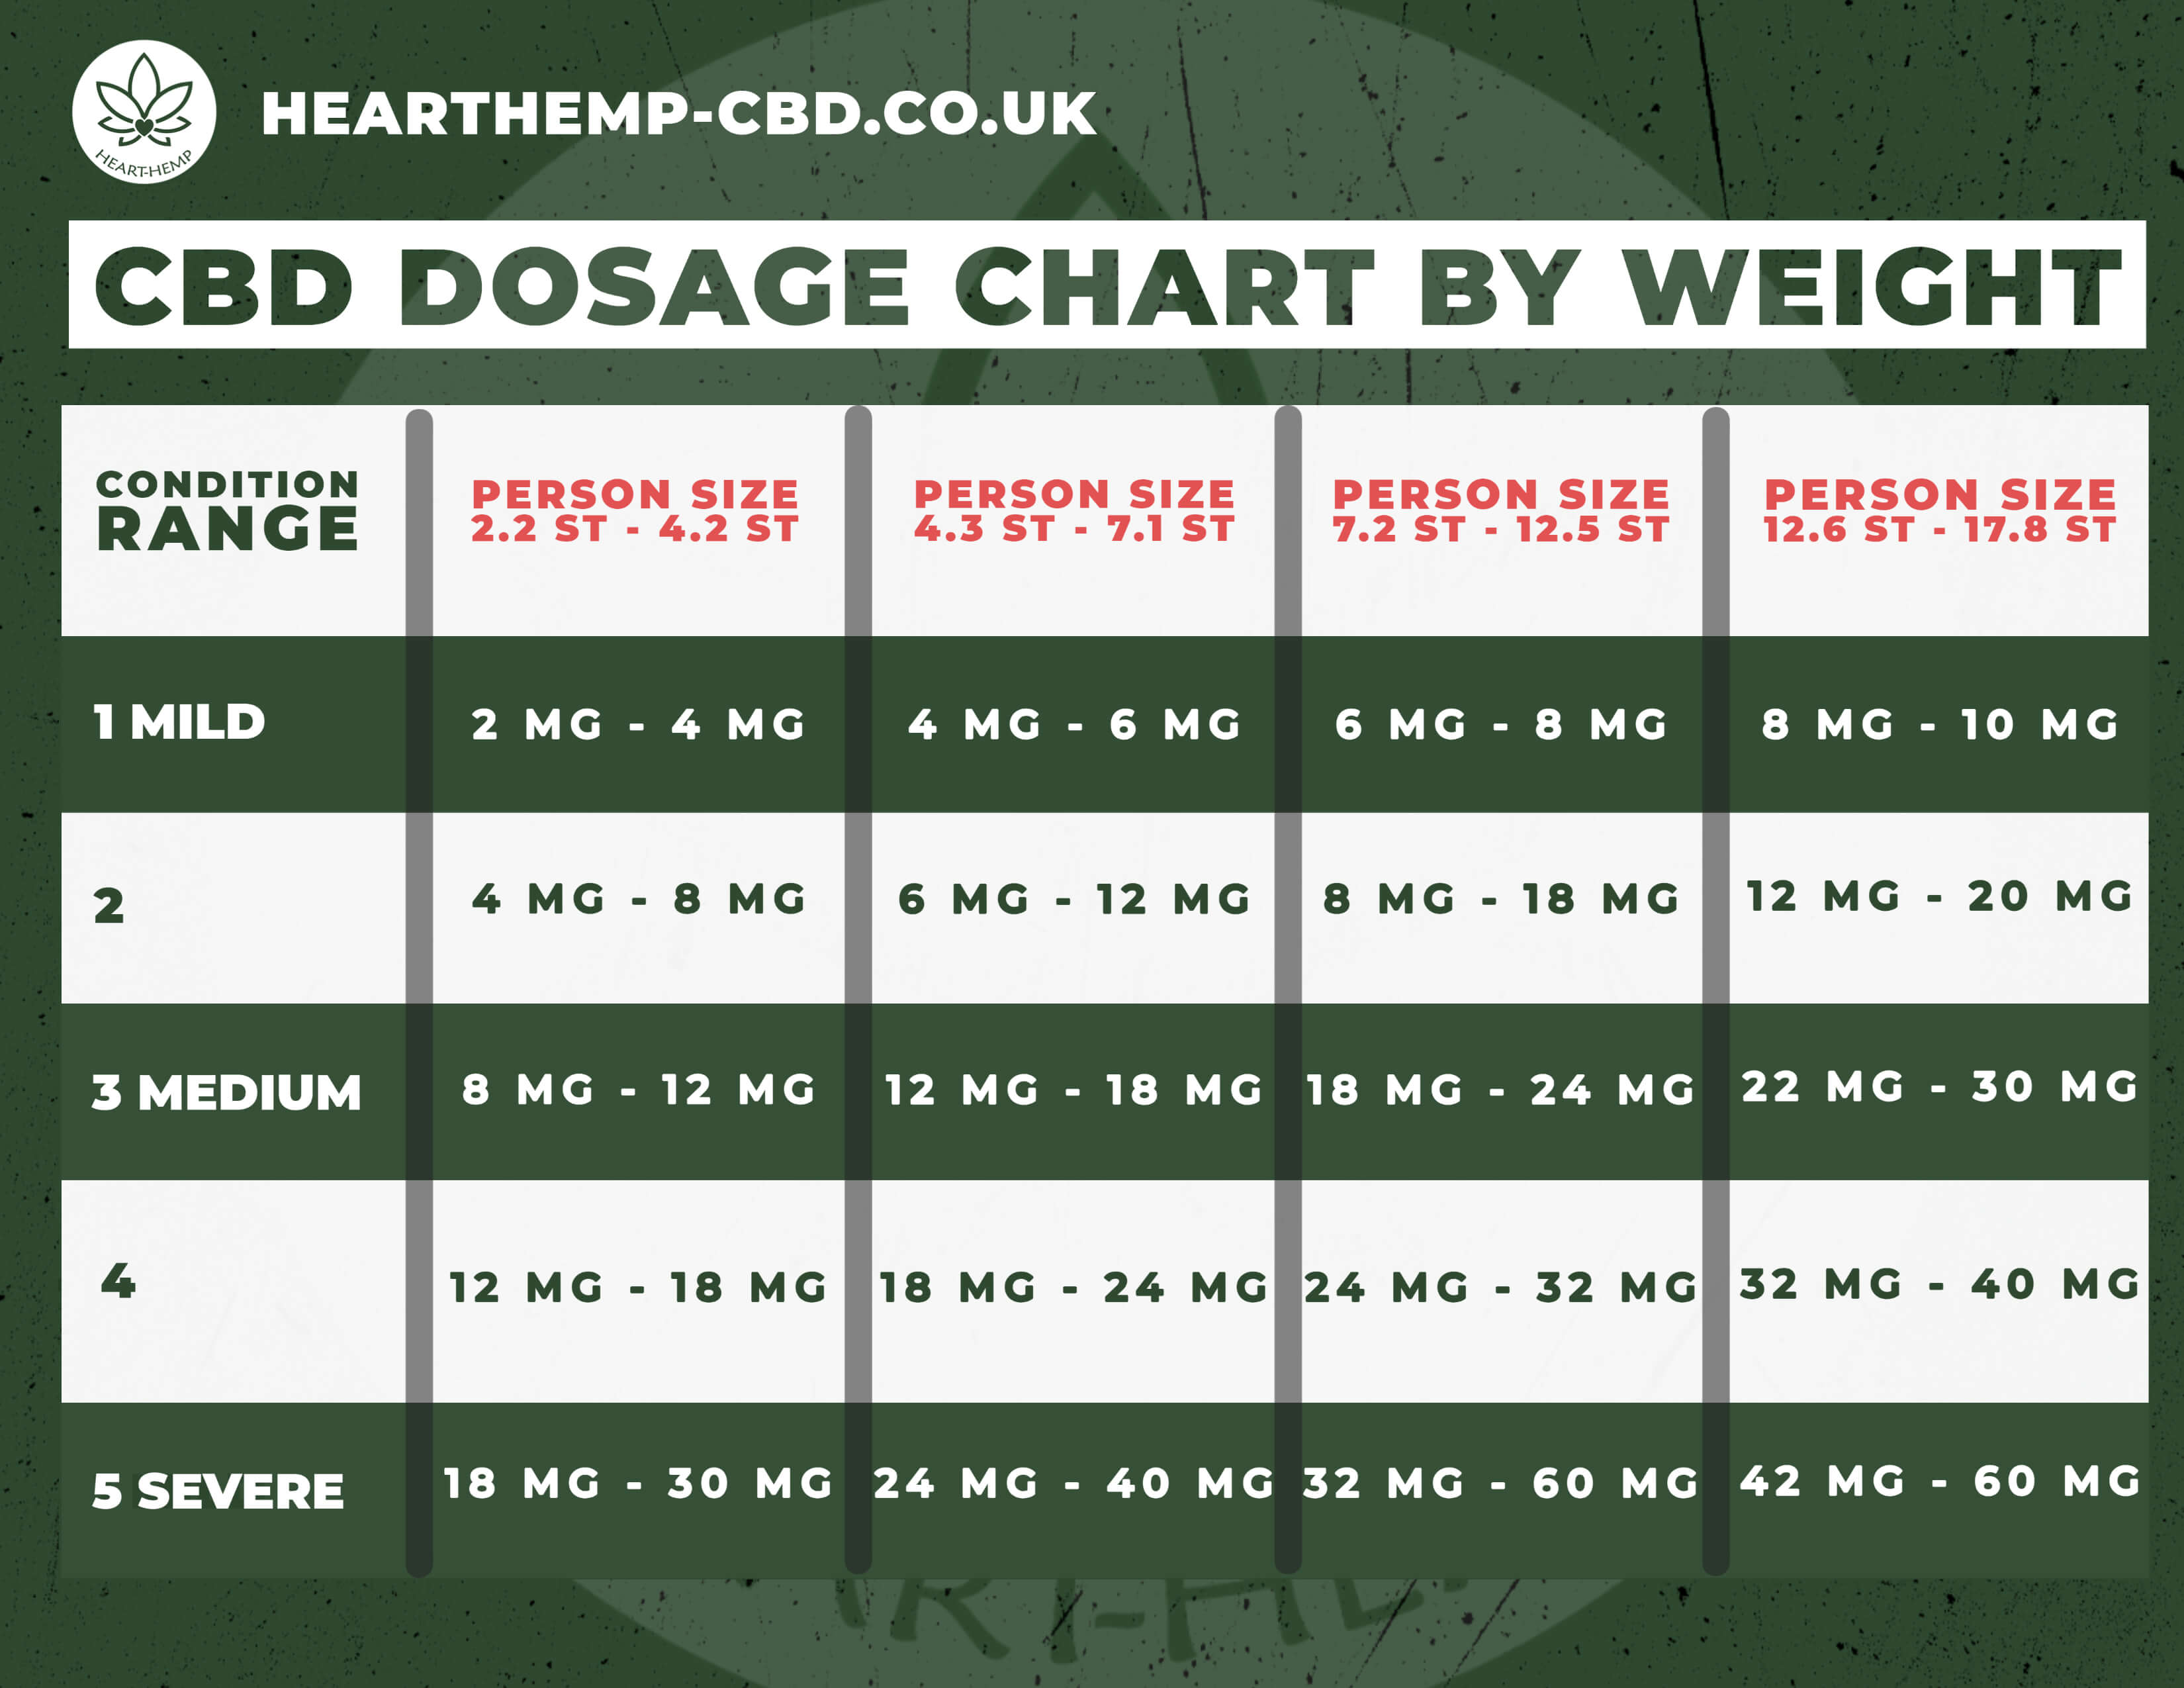 Edibles dosage chart: How to dose marijuana edibles - Leafly